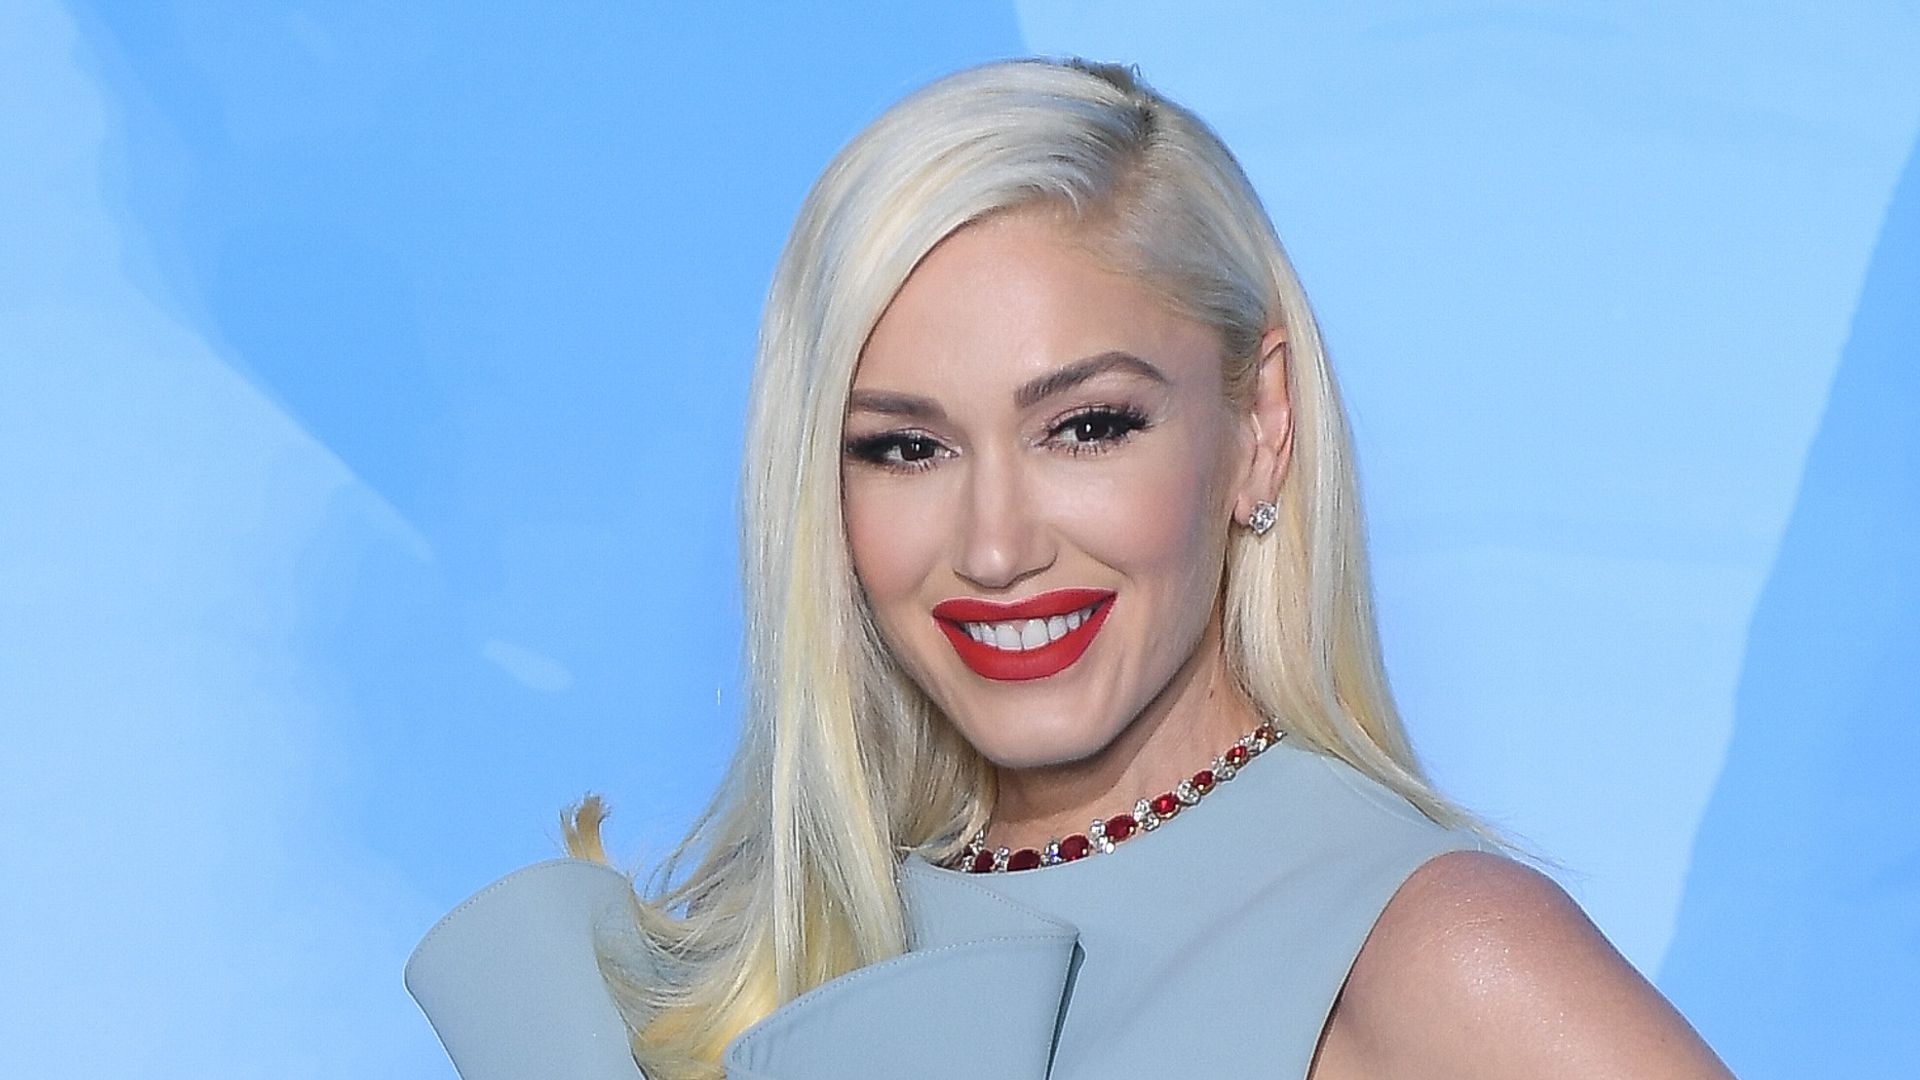 Gwen Stefani attends the Gala for the Global Ocean hosted by H.S.H. Prince Albert II of Monaco at Opera of Monte-Carlo on September 26, 2019 in Monte-Carlo, Monaco.